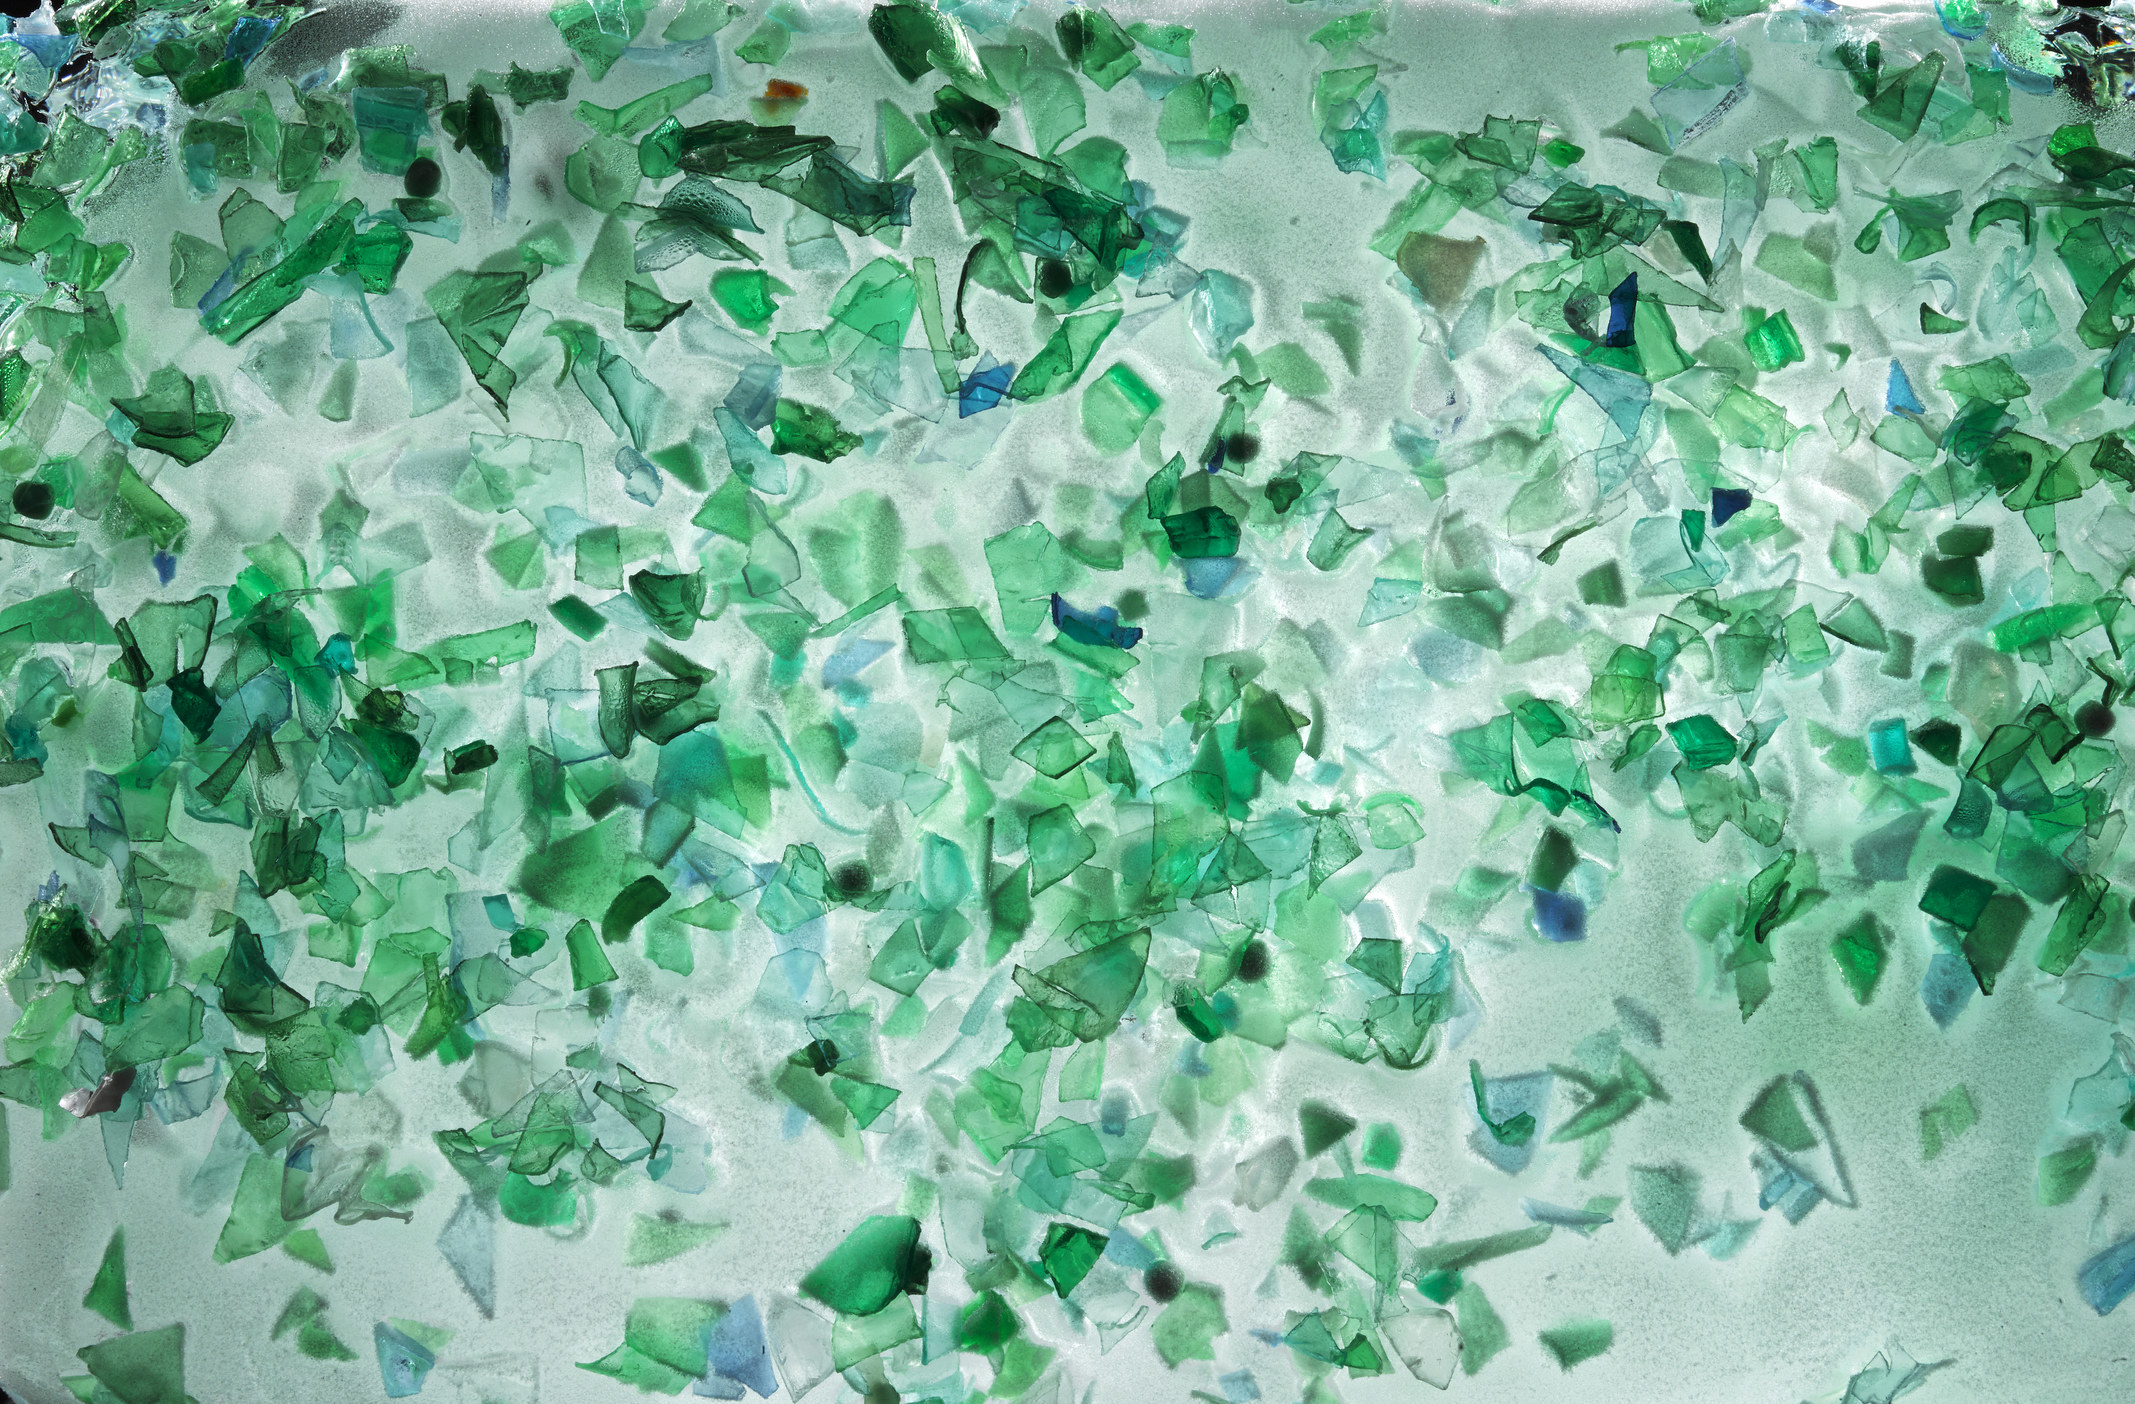 Small pieces of plastic from green bottles fished from the ocean